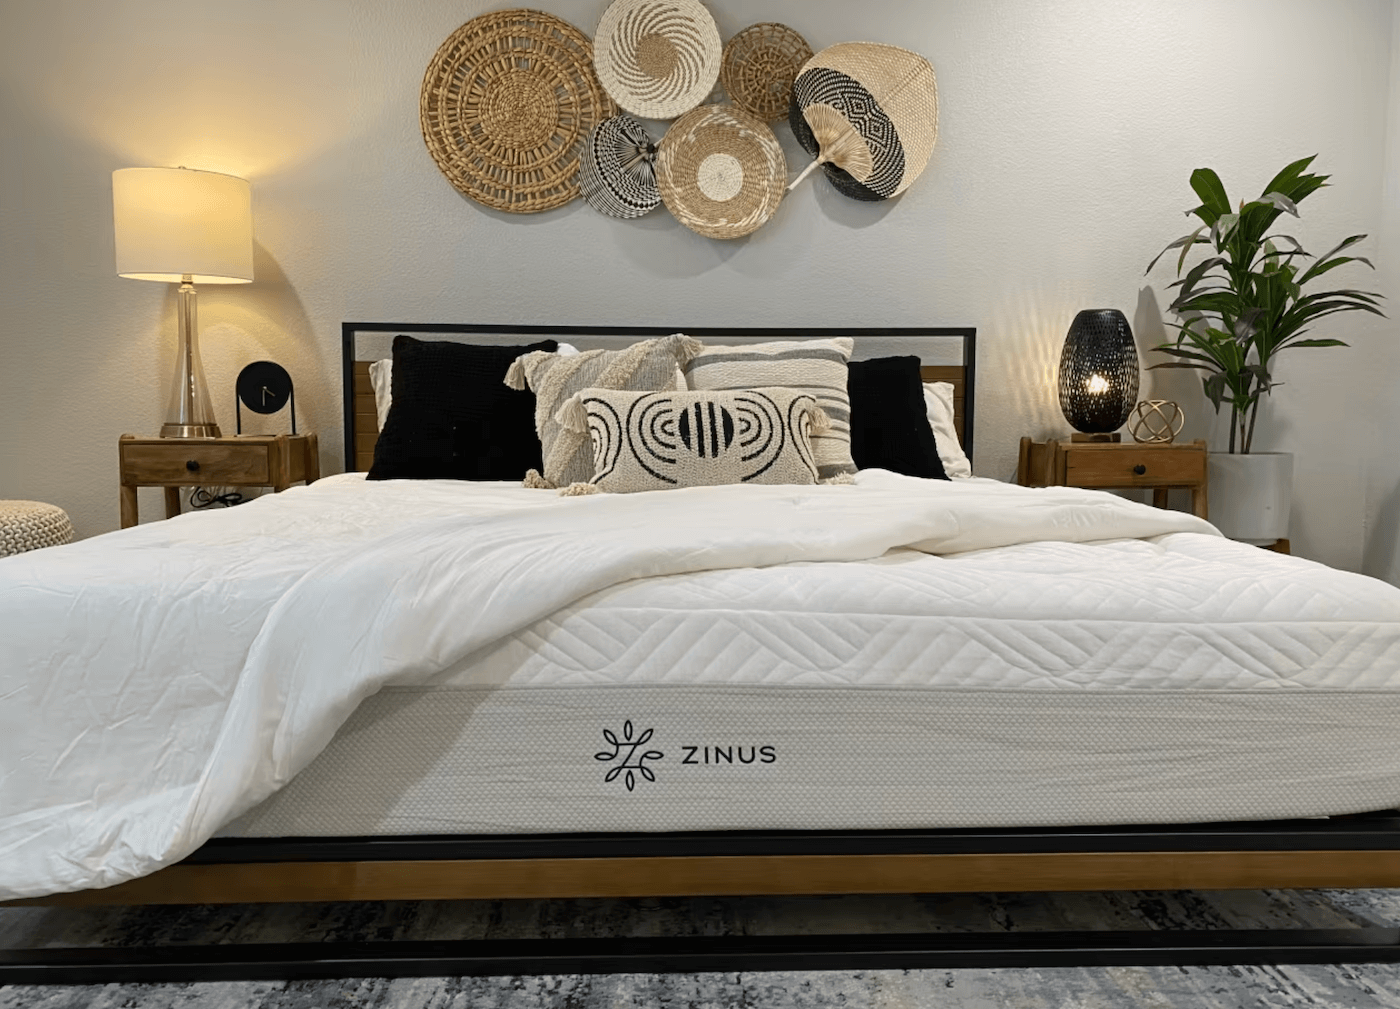 3 Reasons a Soft Mattress May Be Right for You